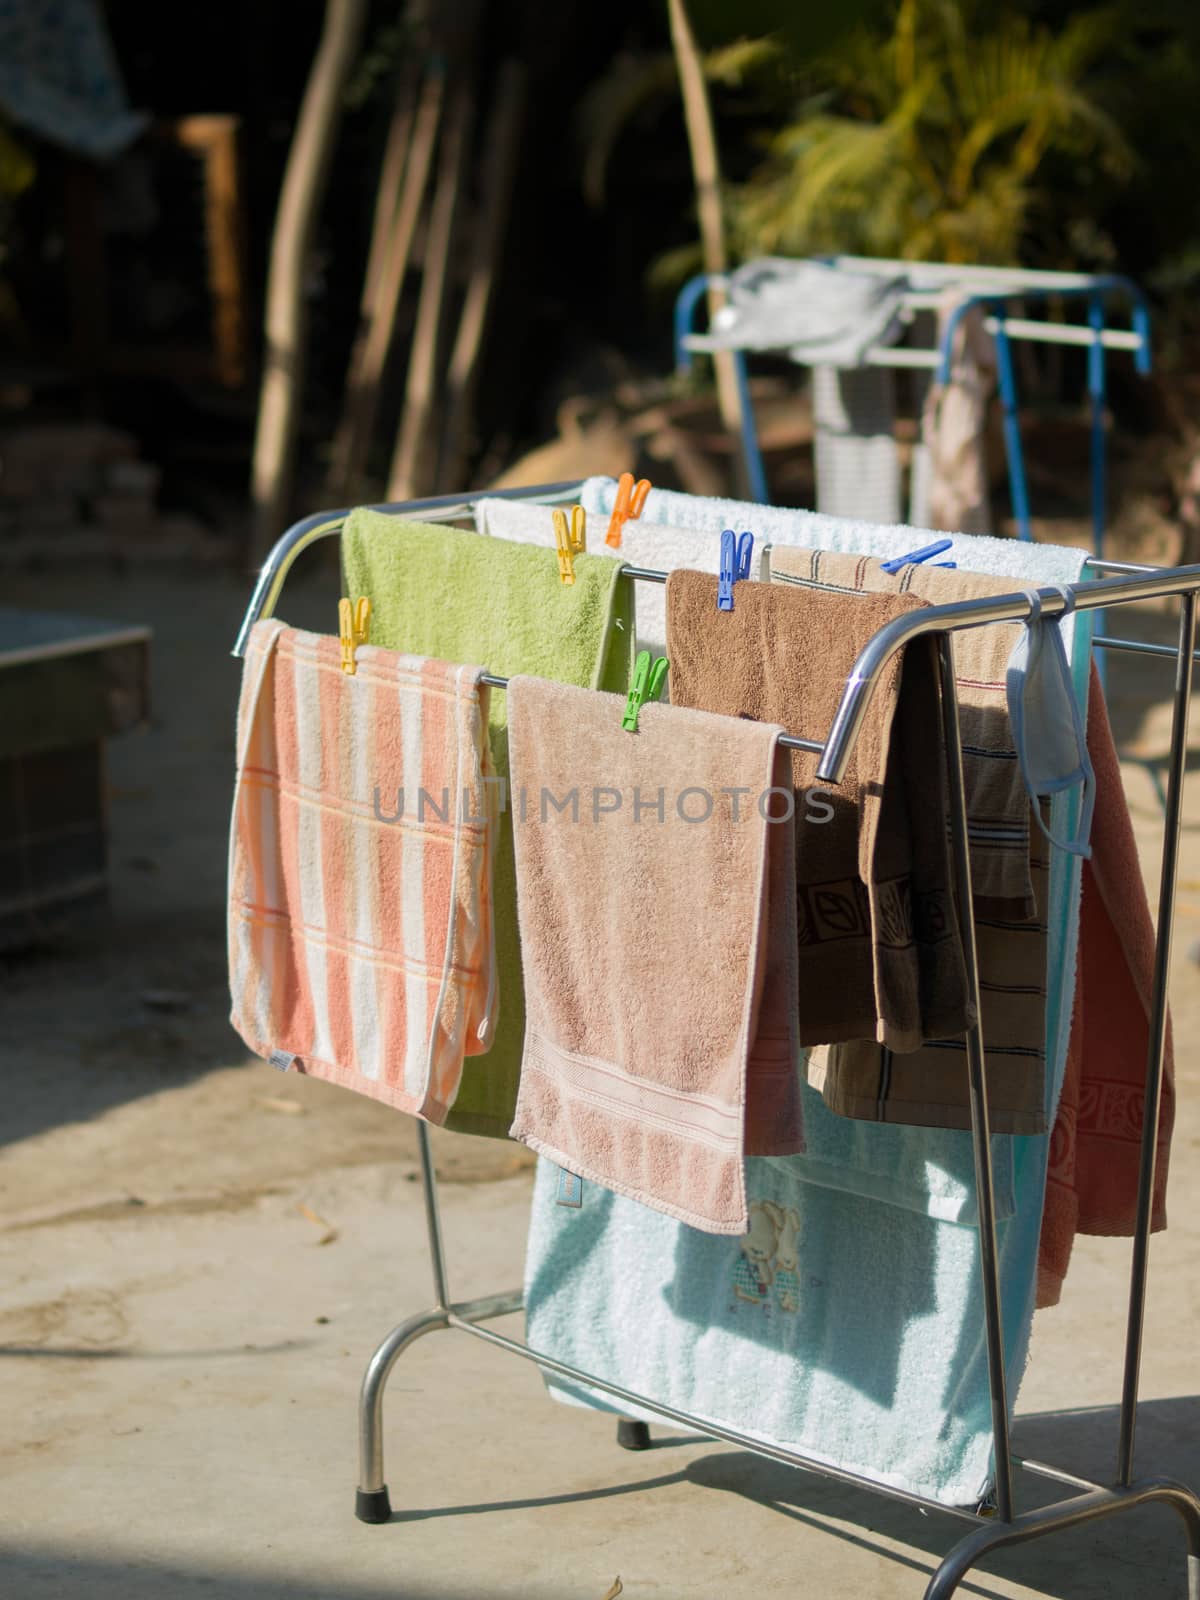 COLOR PHOTO OF GROUP OF TOWELS UNDER SUNLIGHT